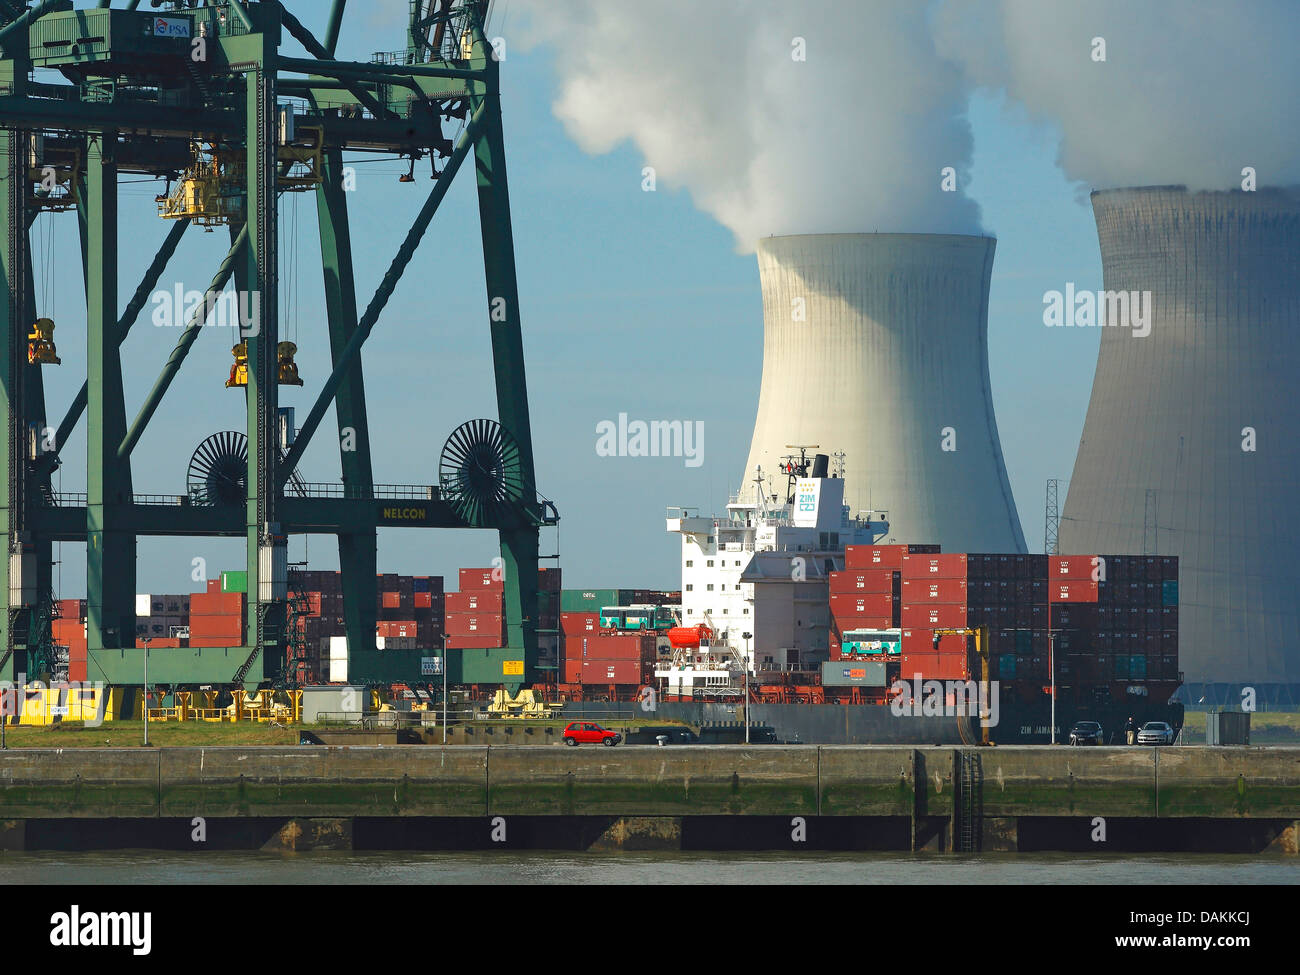 cargo ship in front of cooling towers of a nuclear power plant, Belgium, Antwerp Stock Photo